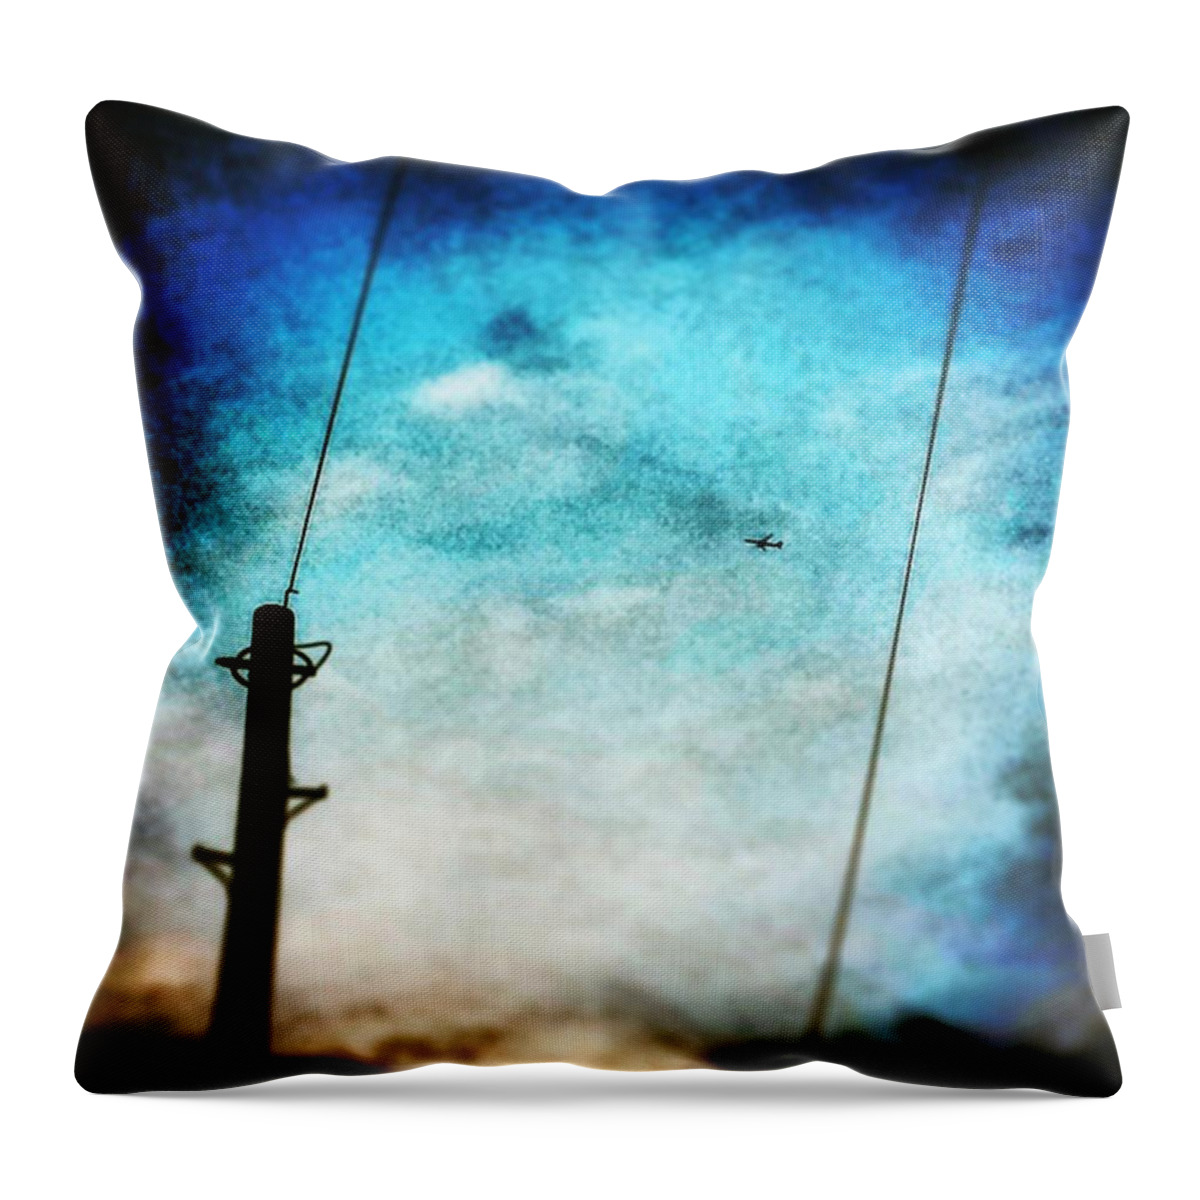 Androidcommunity Throw Pillow featuring the photograph #android #androidonly #google #1 by Jason Roust